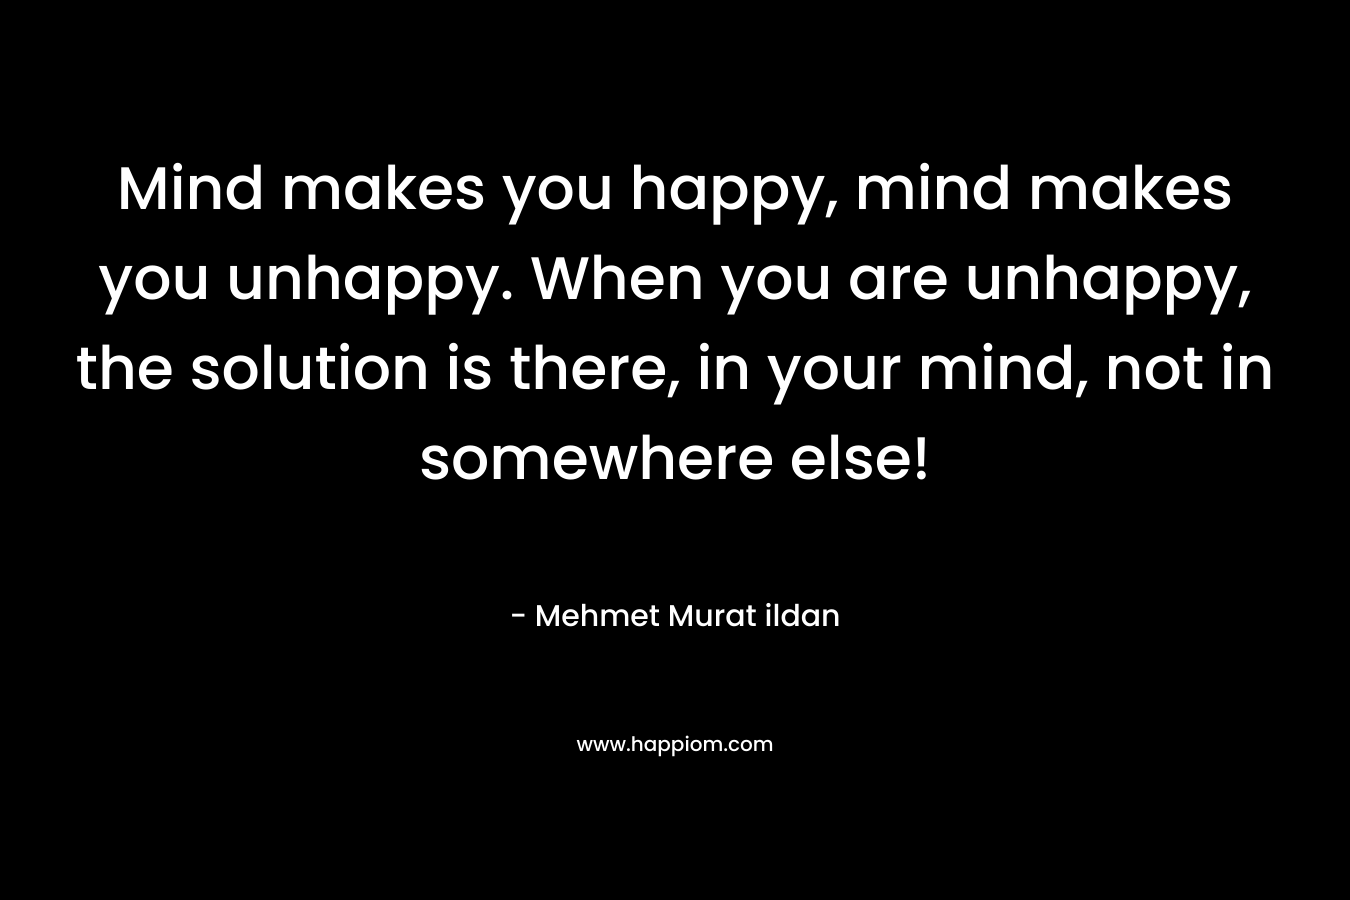 Mind makes you happy, mind makes you unhappy. When you are unhappy, the solution is there, in your mind, not in somewhere else!